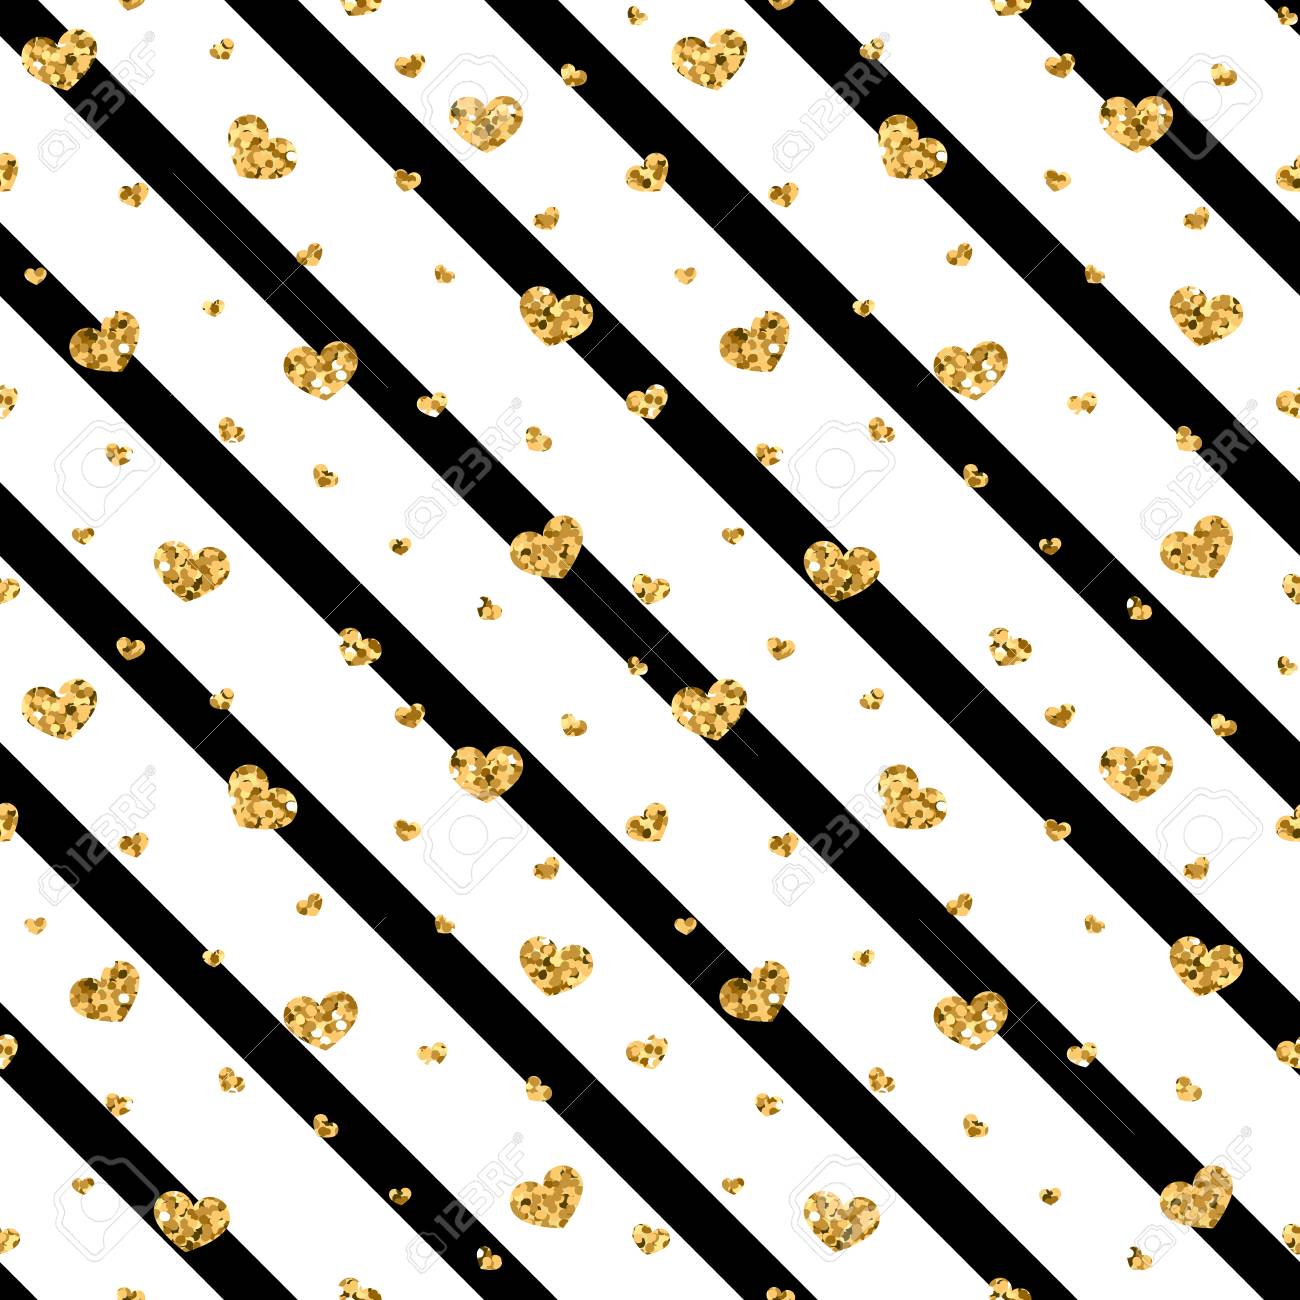 Black White And Gold Wallpapers